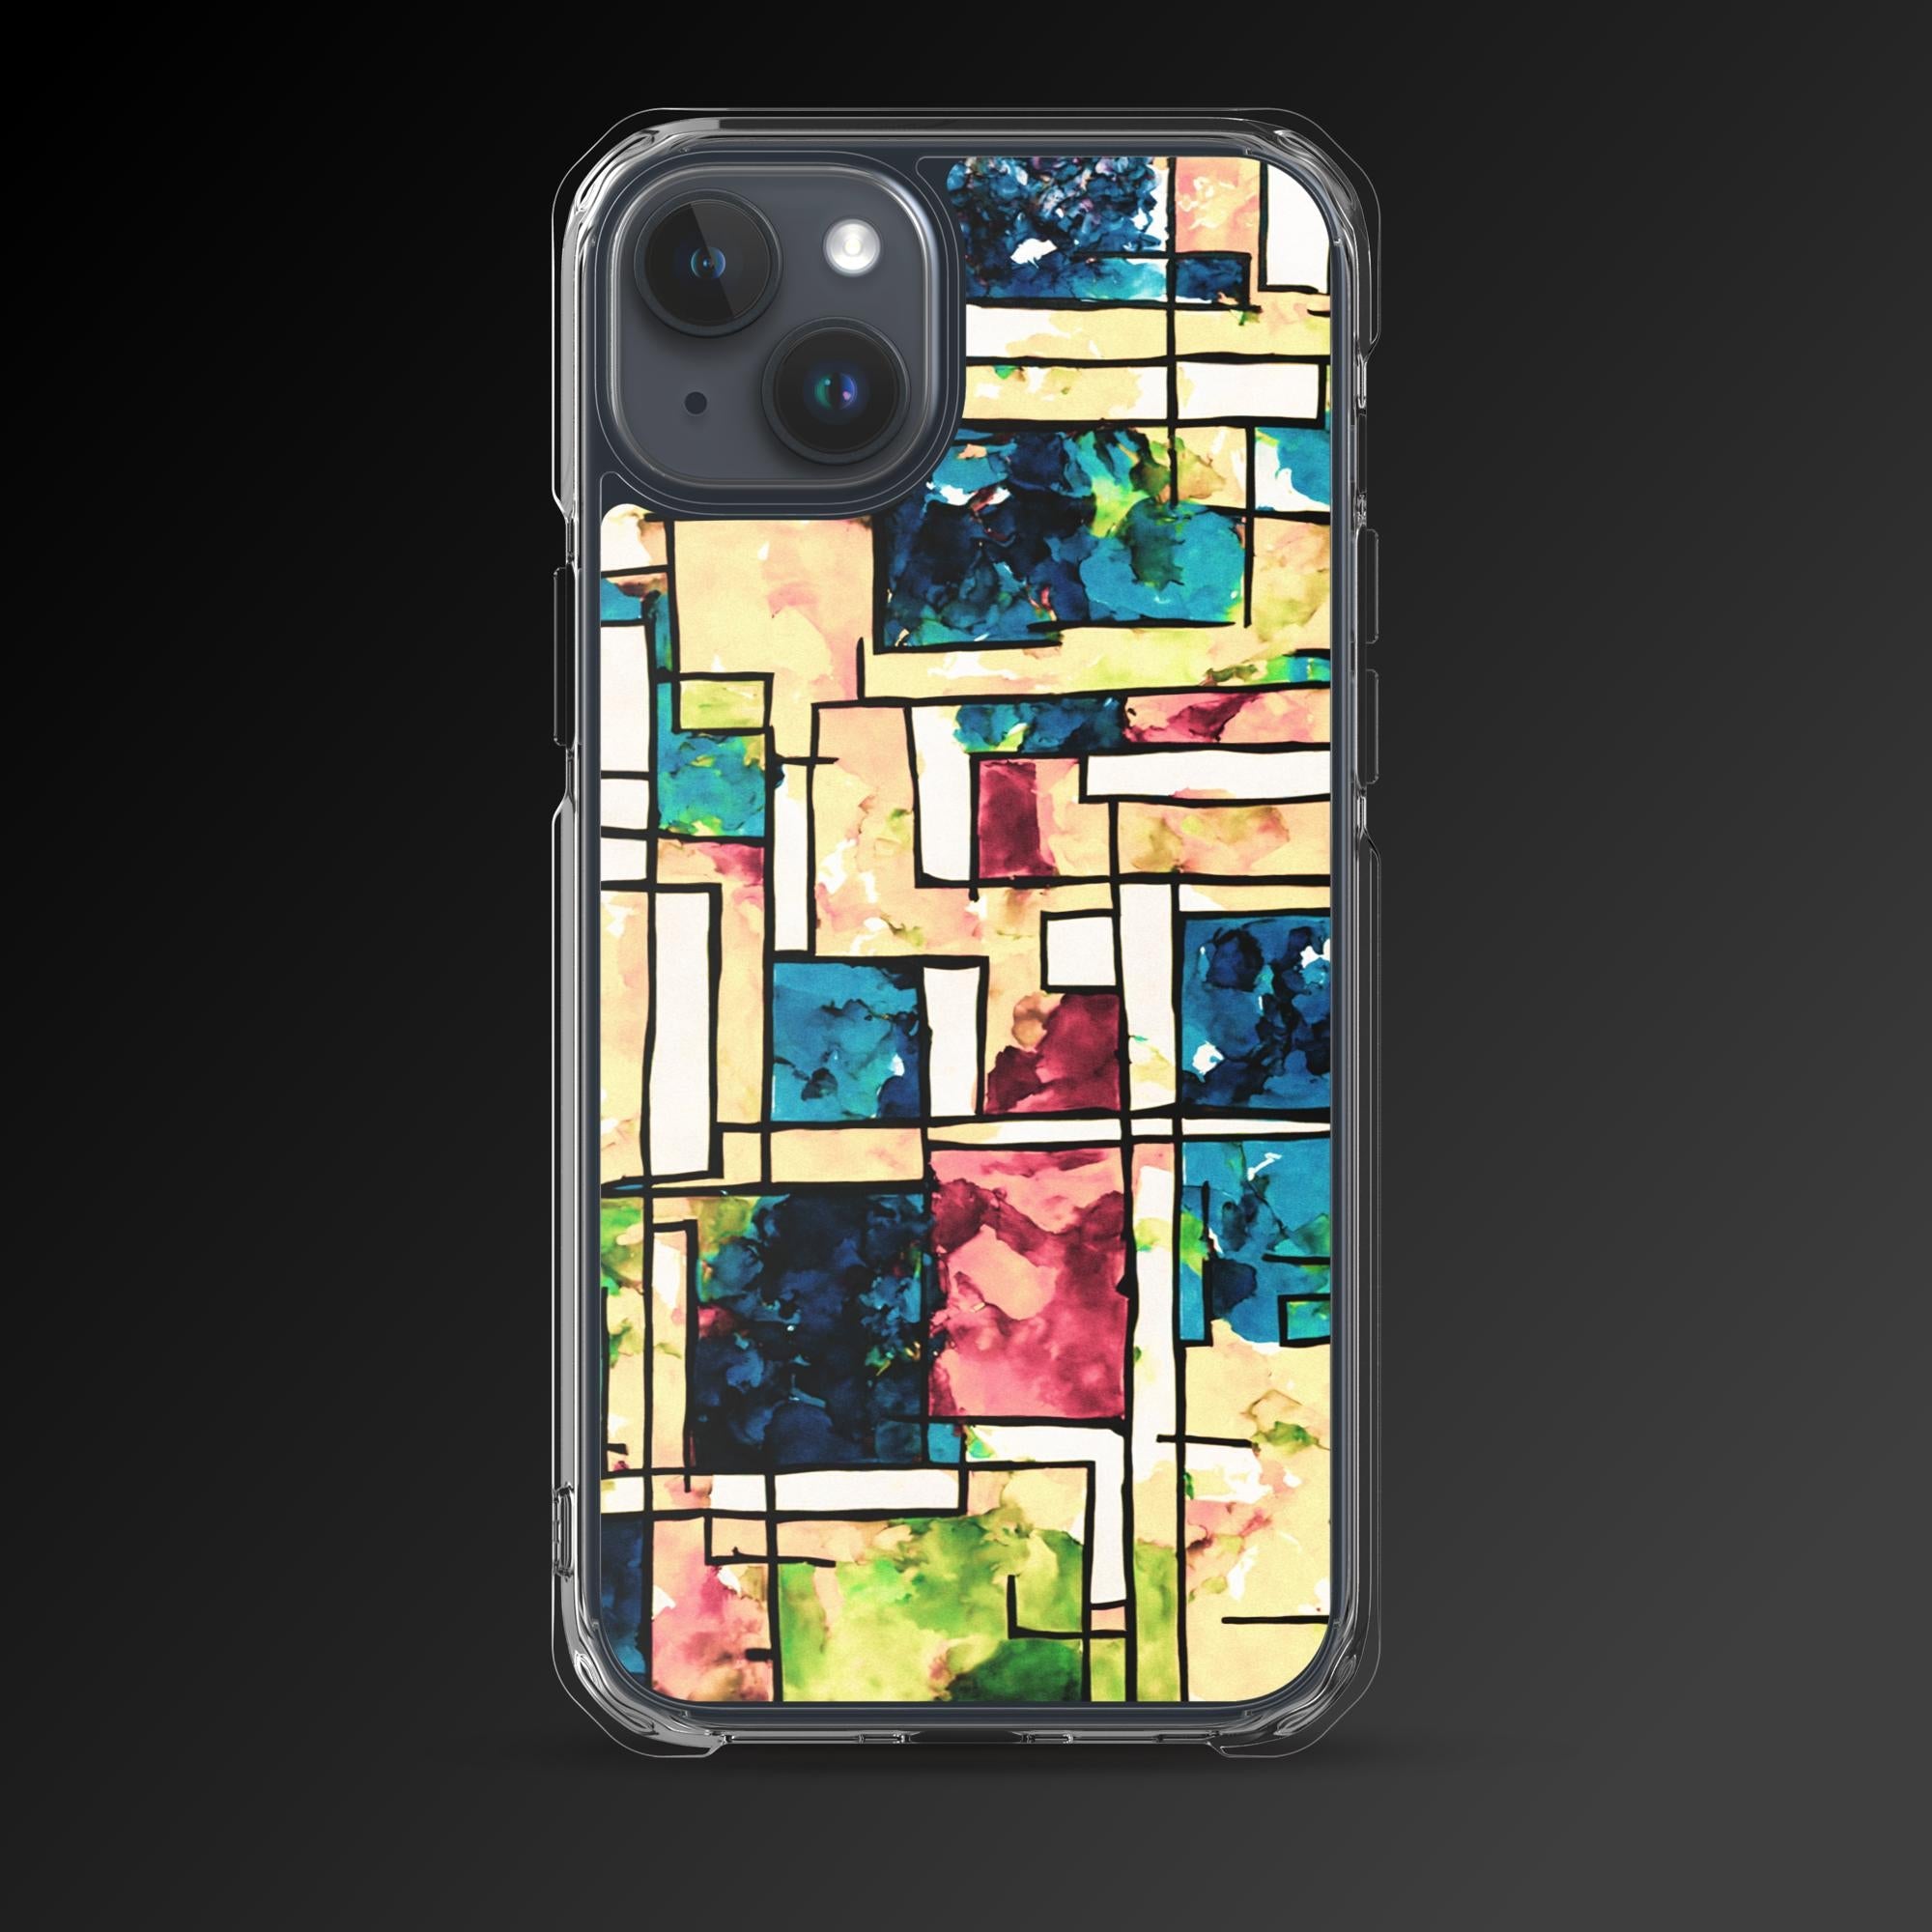 "Warm yet cold" clear iphone case - Clear iphone case - Ever colorful